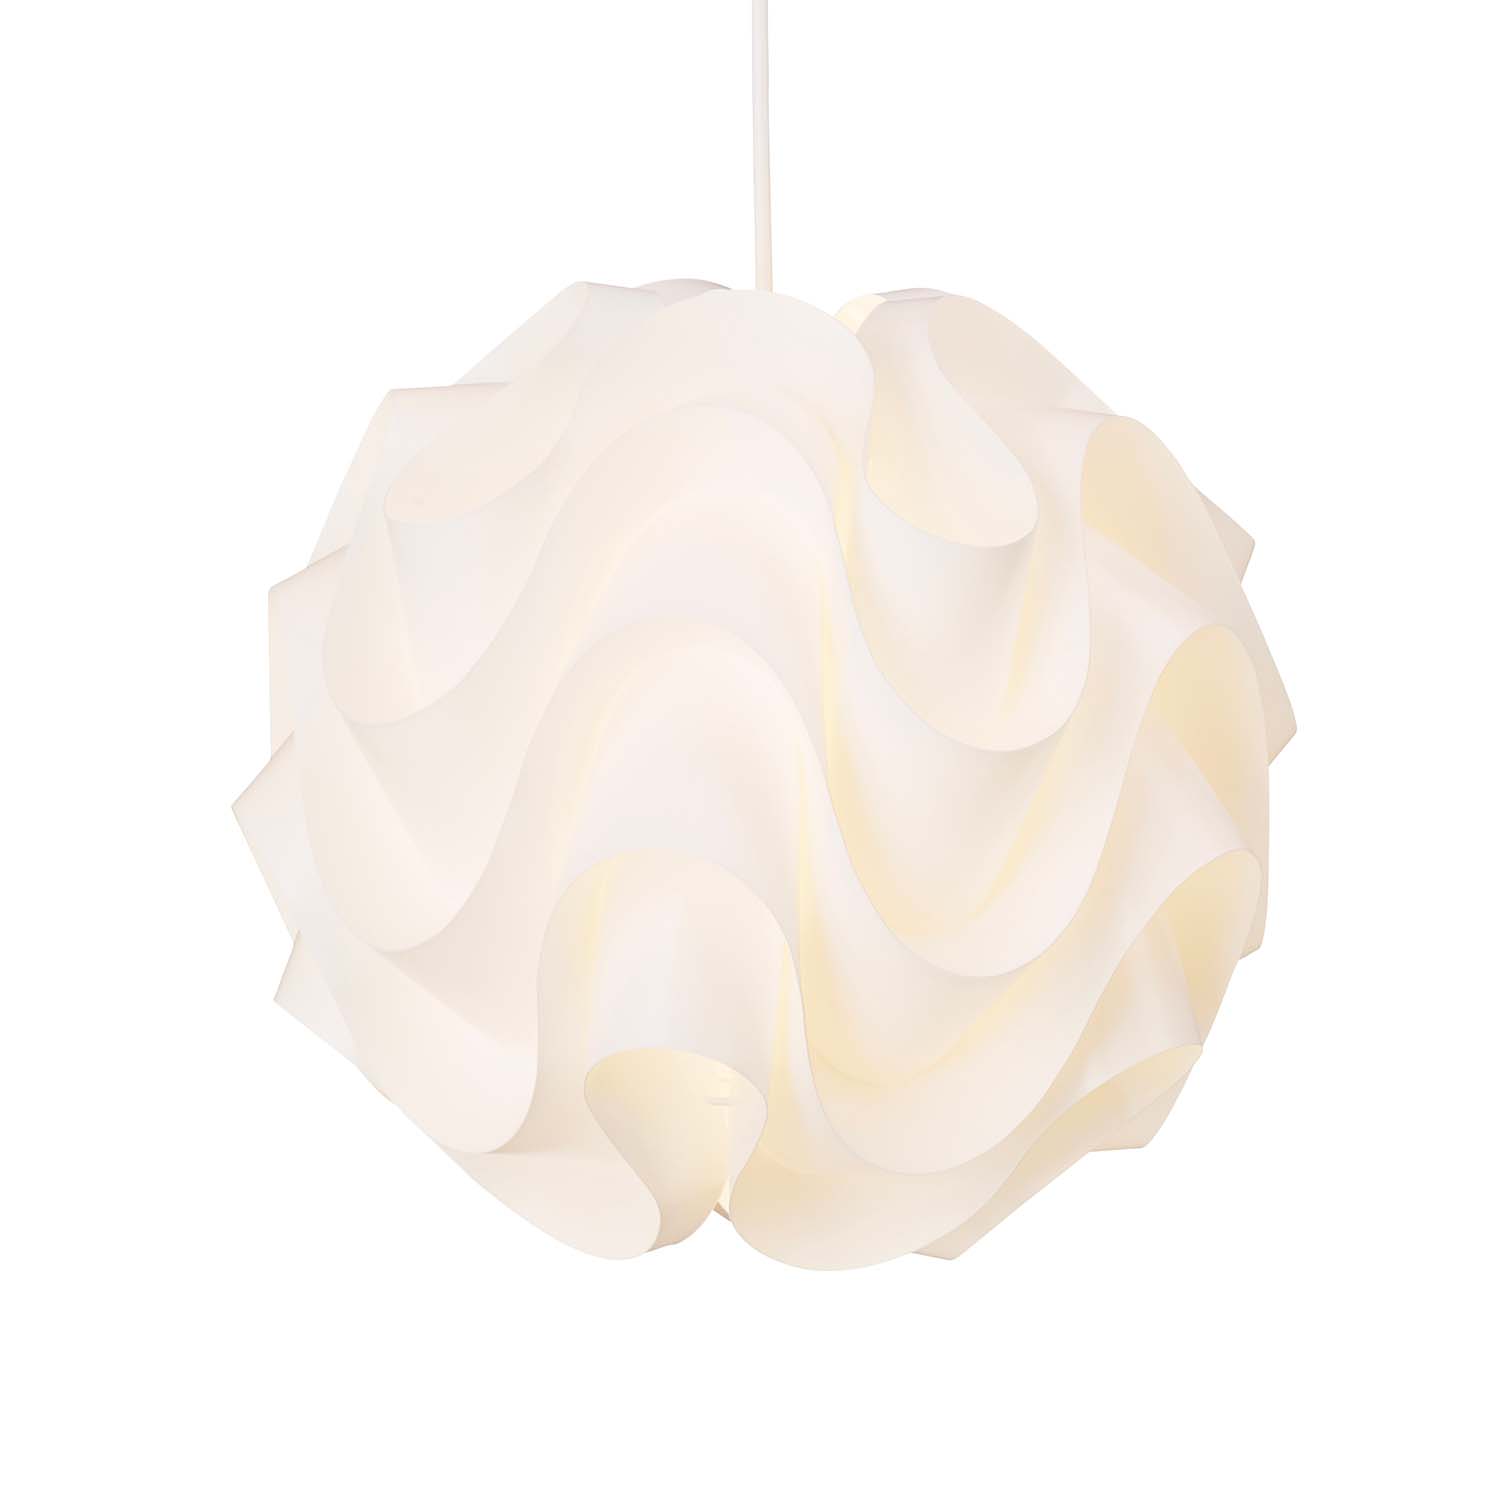 CLASSIC 172 - Corrugated acrylic ball pendant light, handcrafted